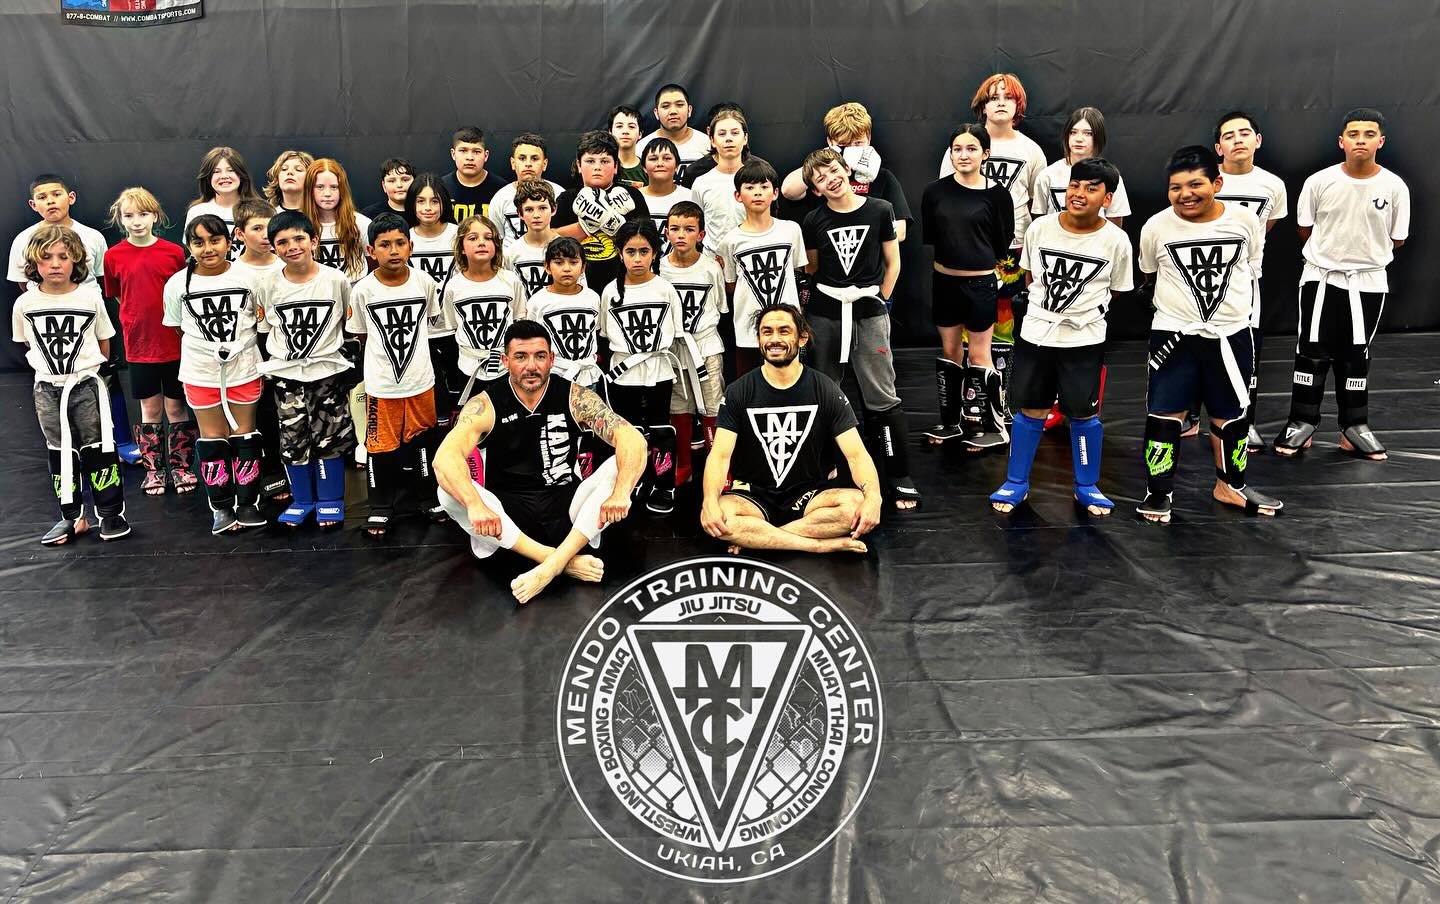 So proud of these young people. #mendotrainingcenter #bangmuaythai